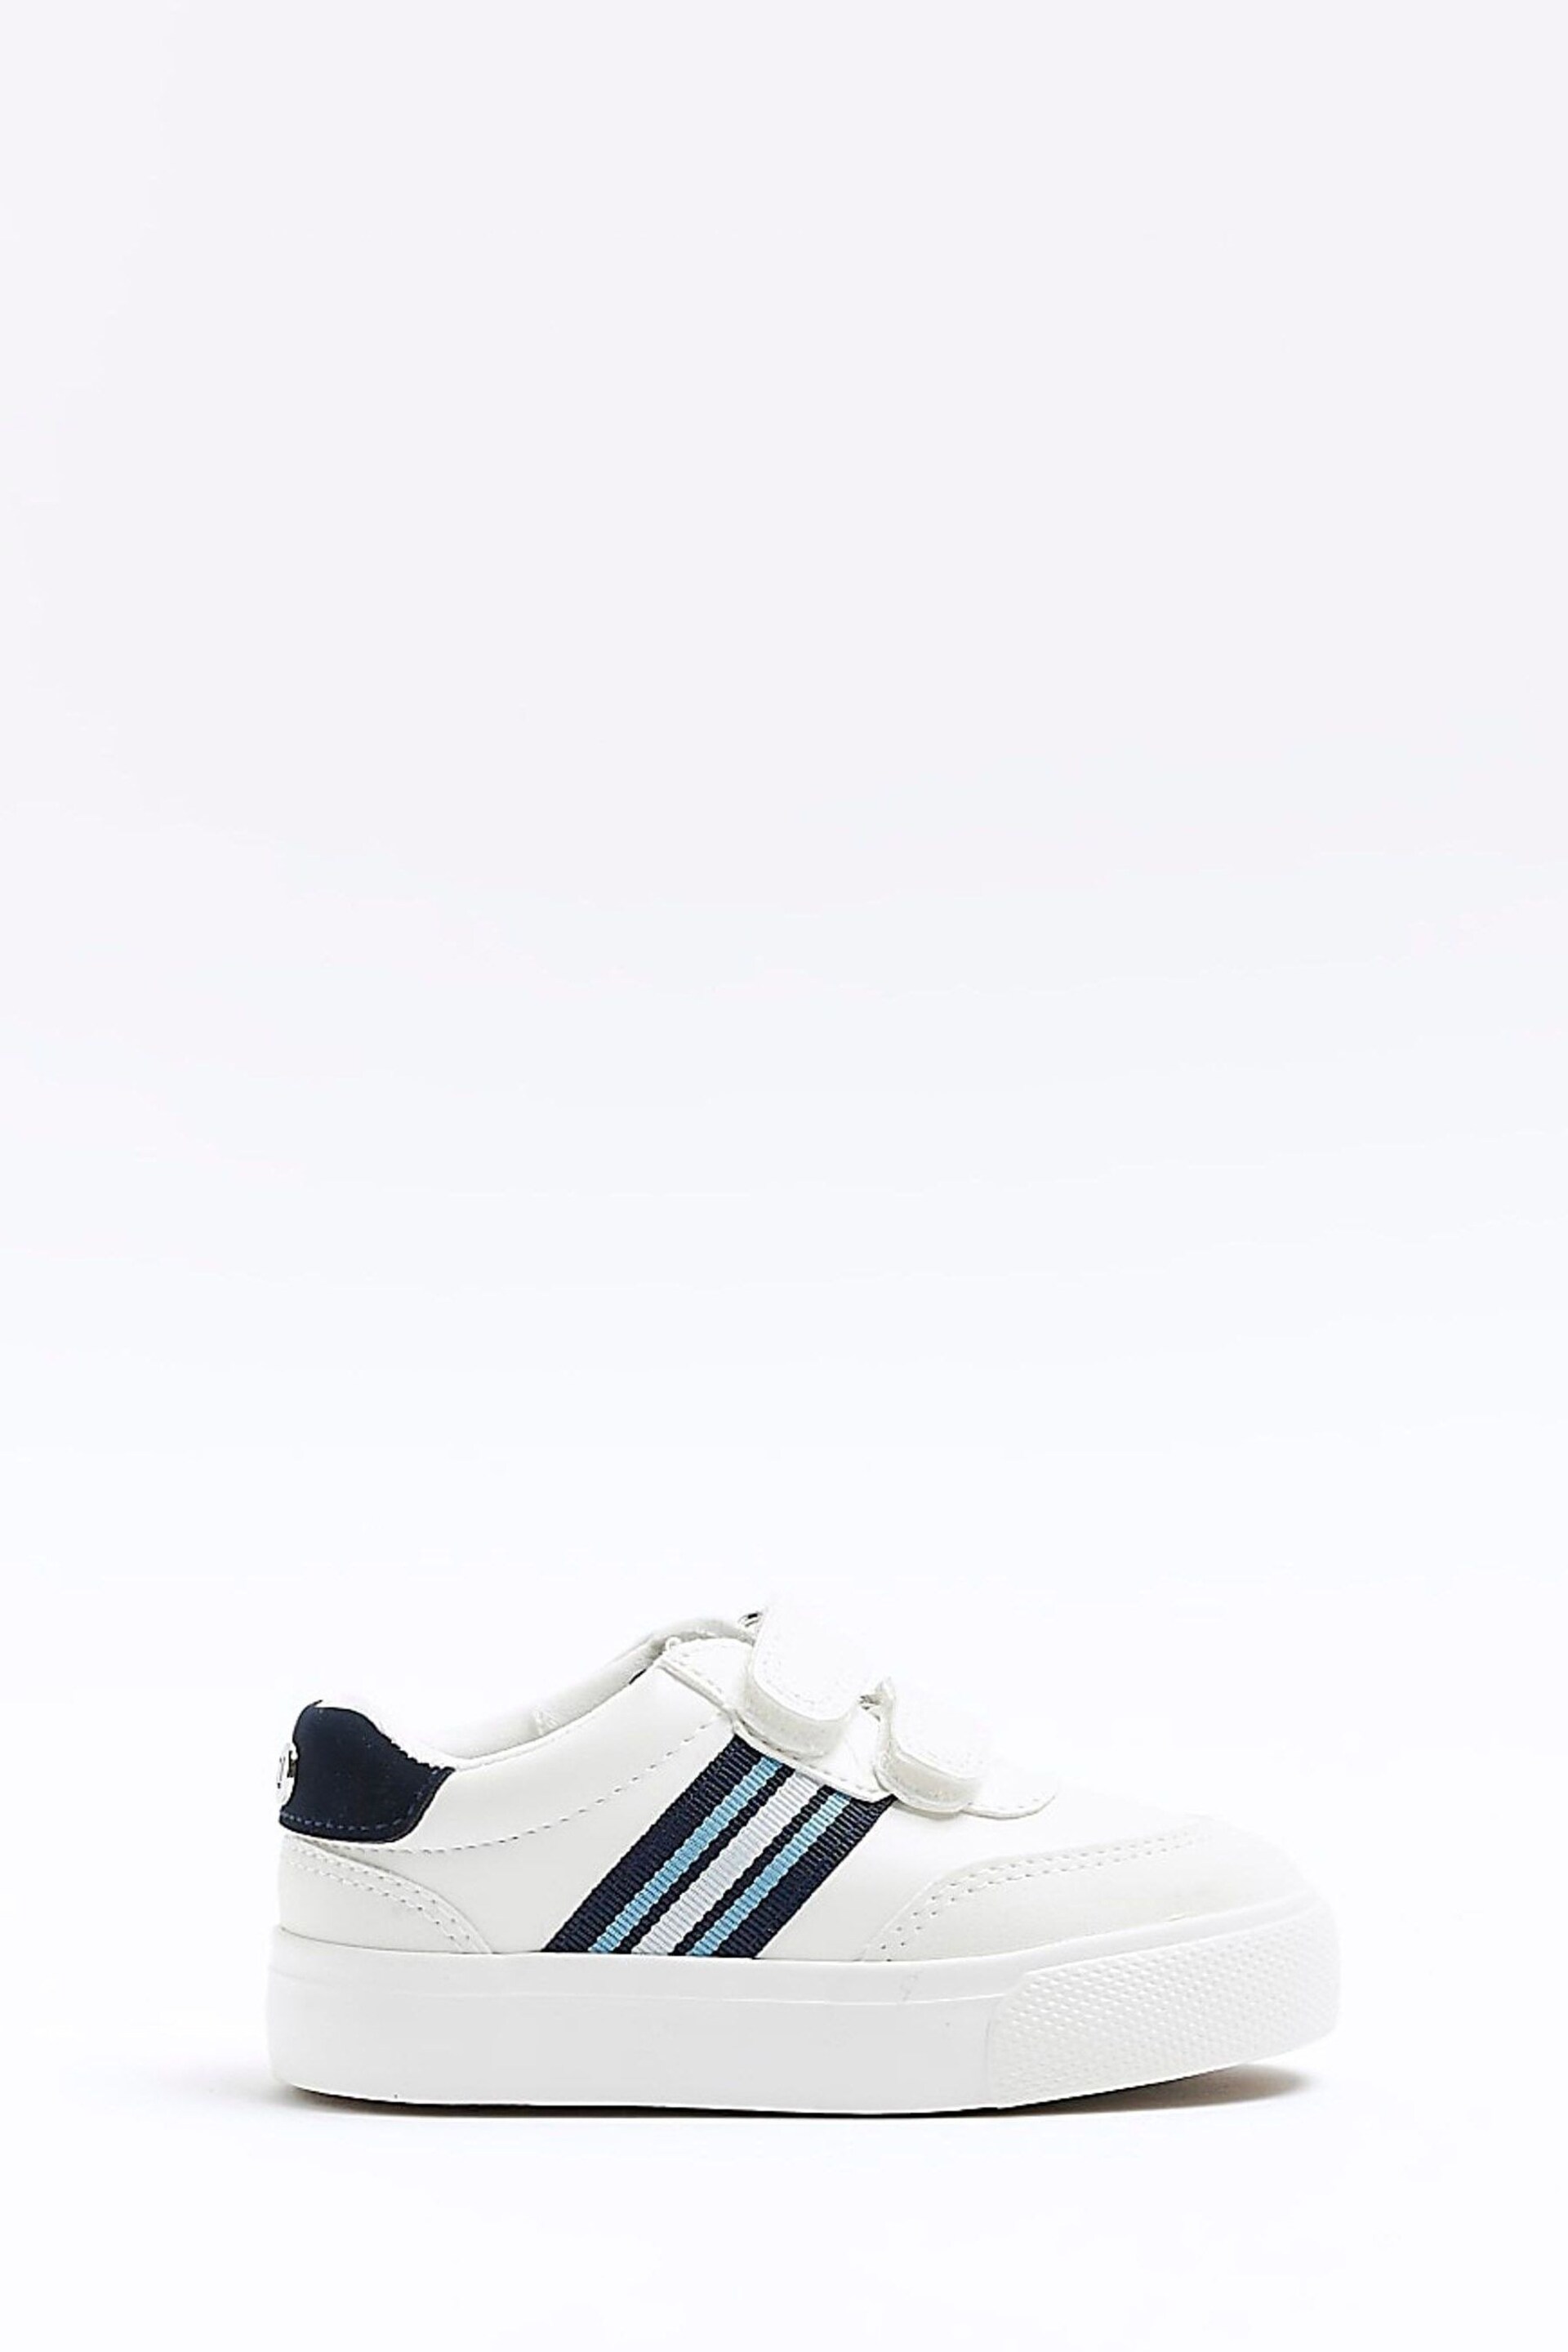 River Island White Boys Striped Plimsole Trainers - Image 1 of 5